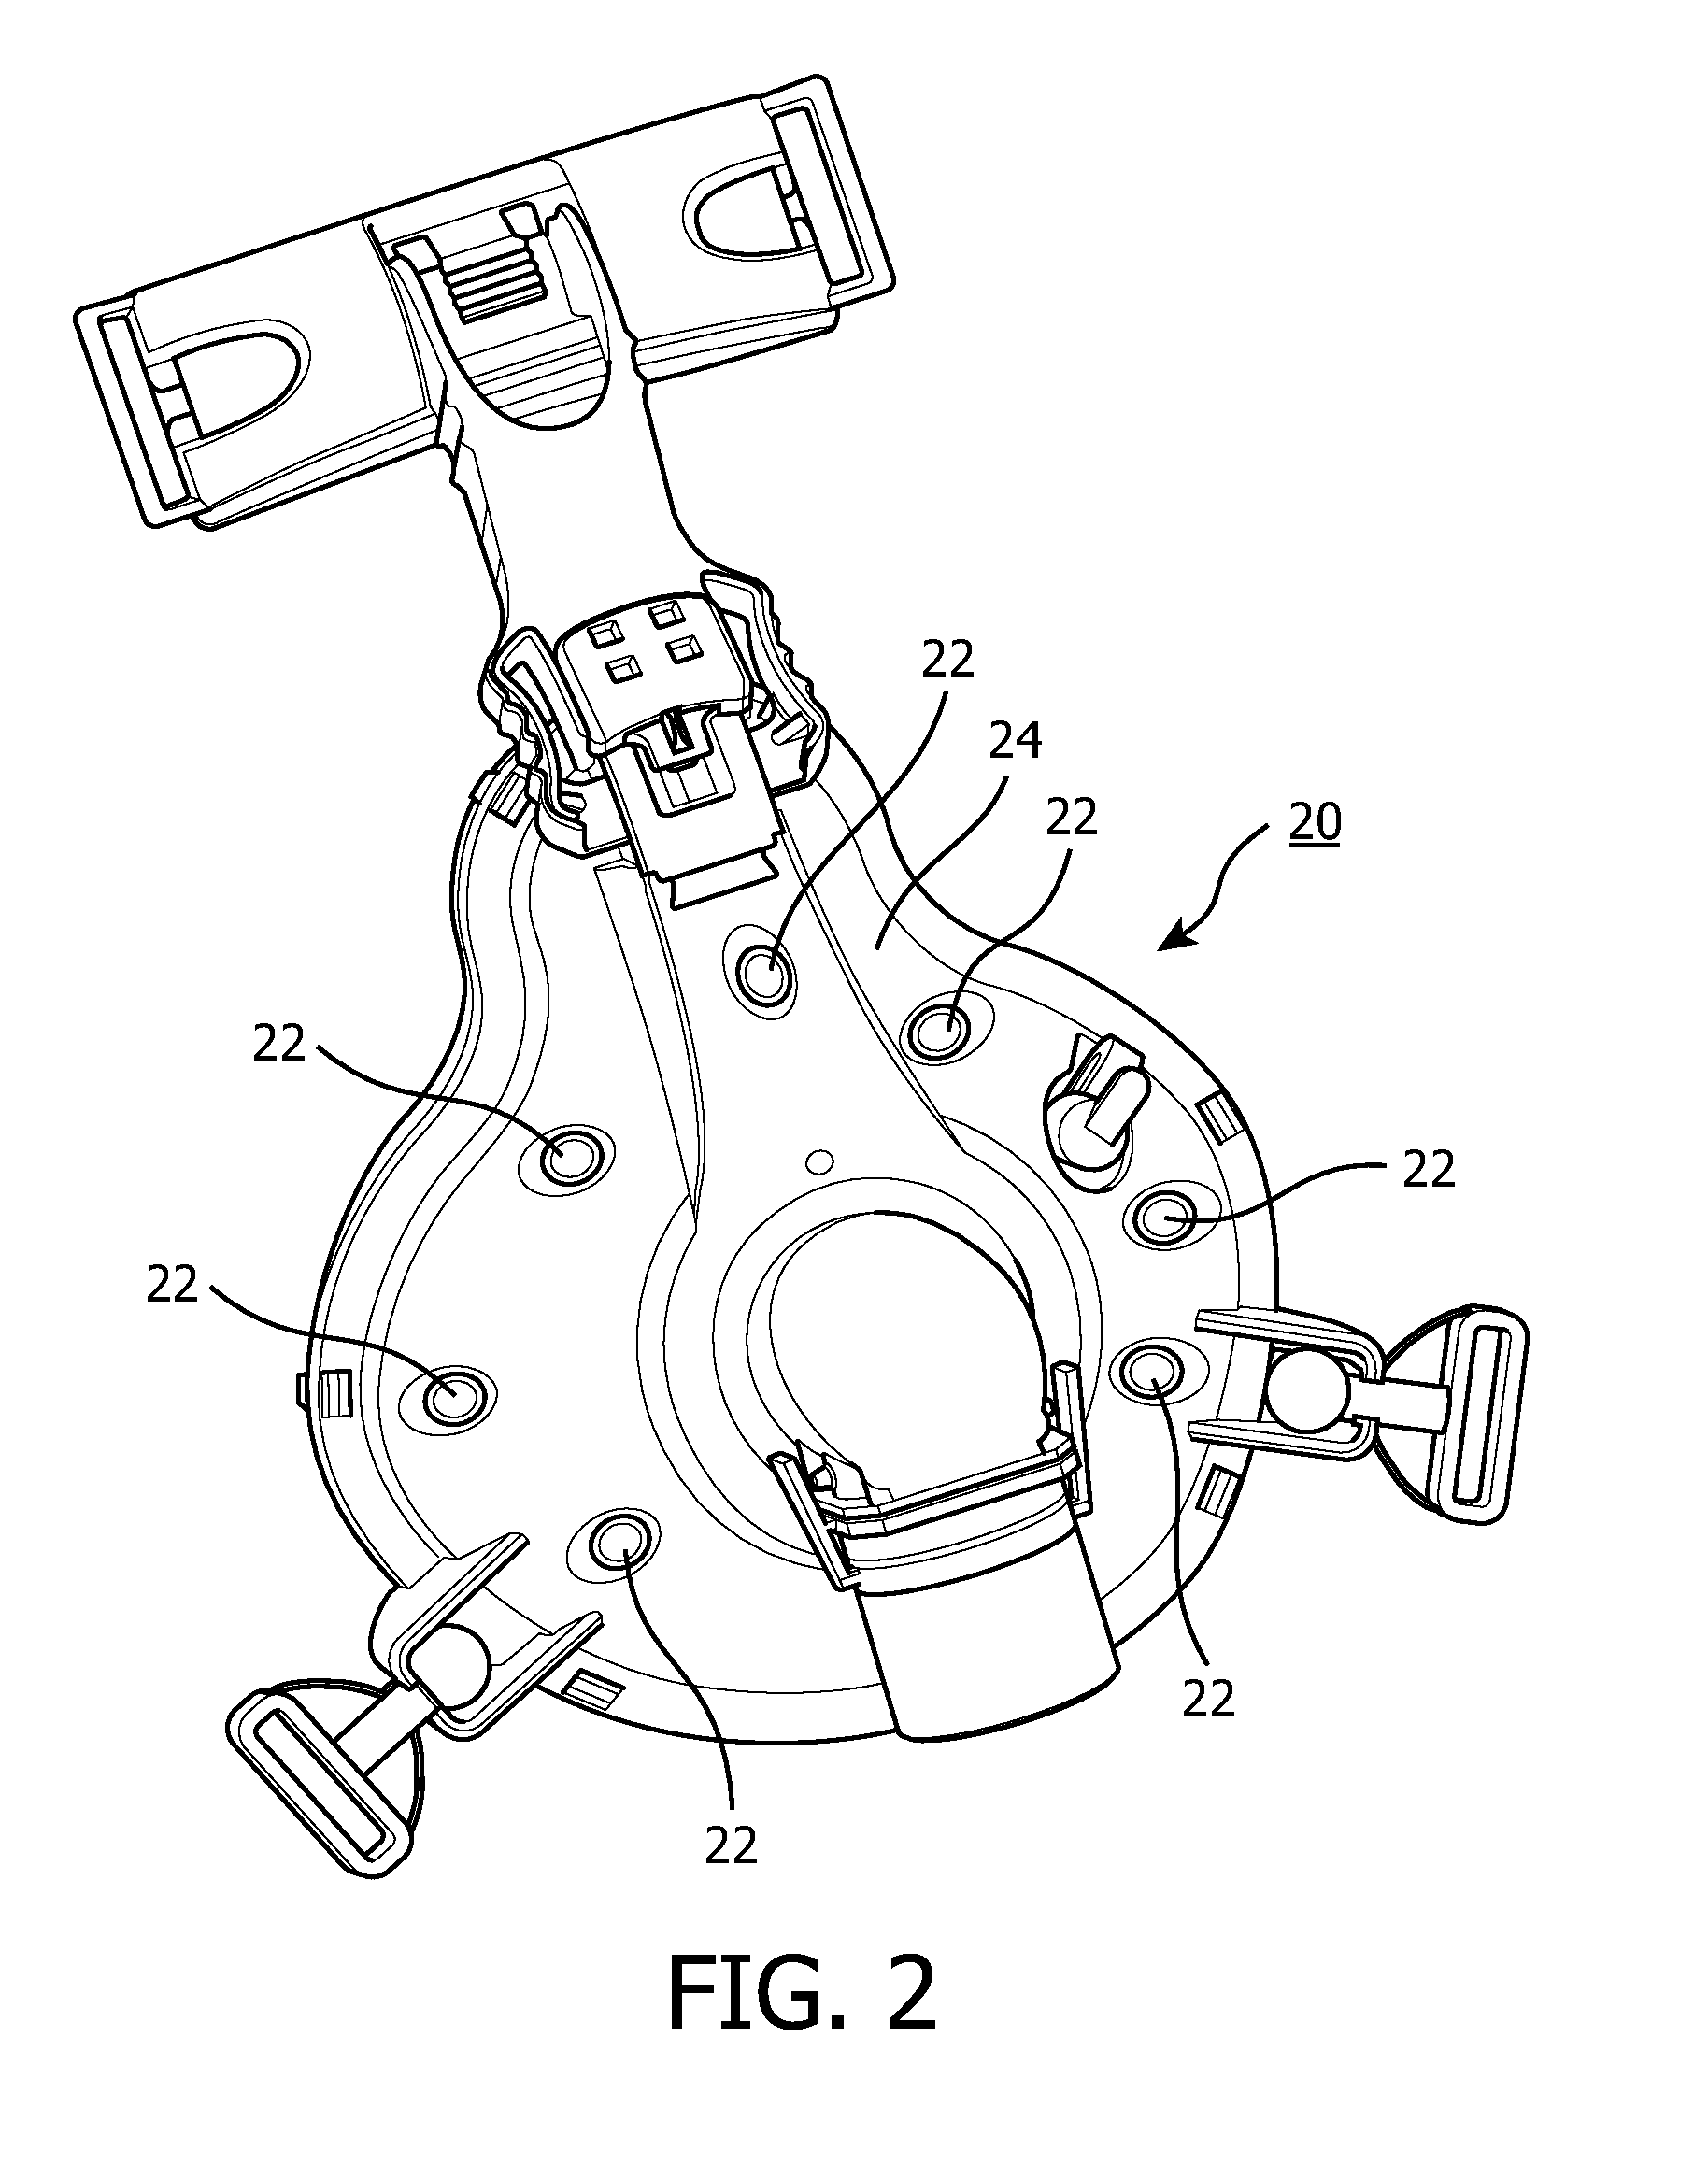 Exhalation port with built-in entrainment valve